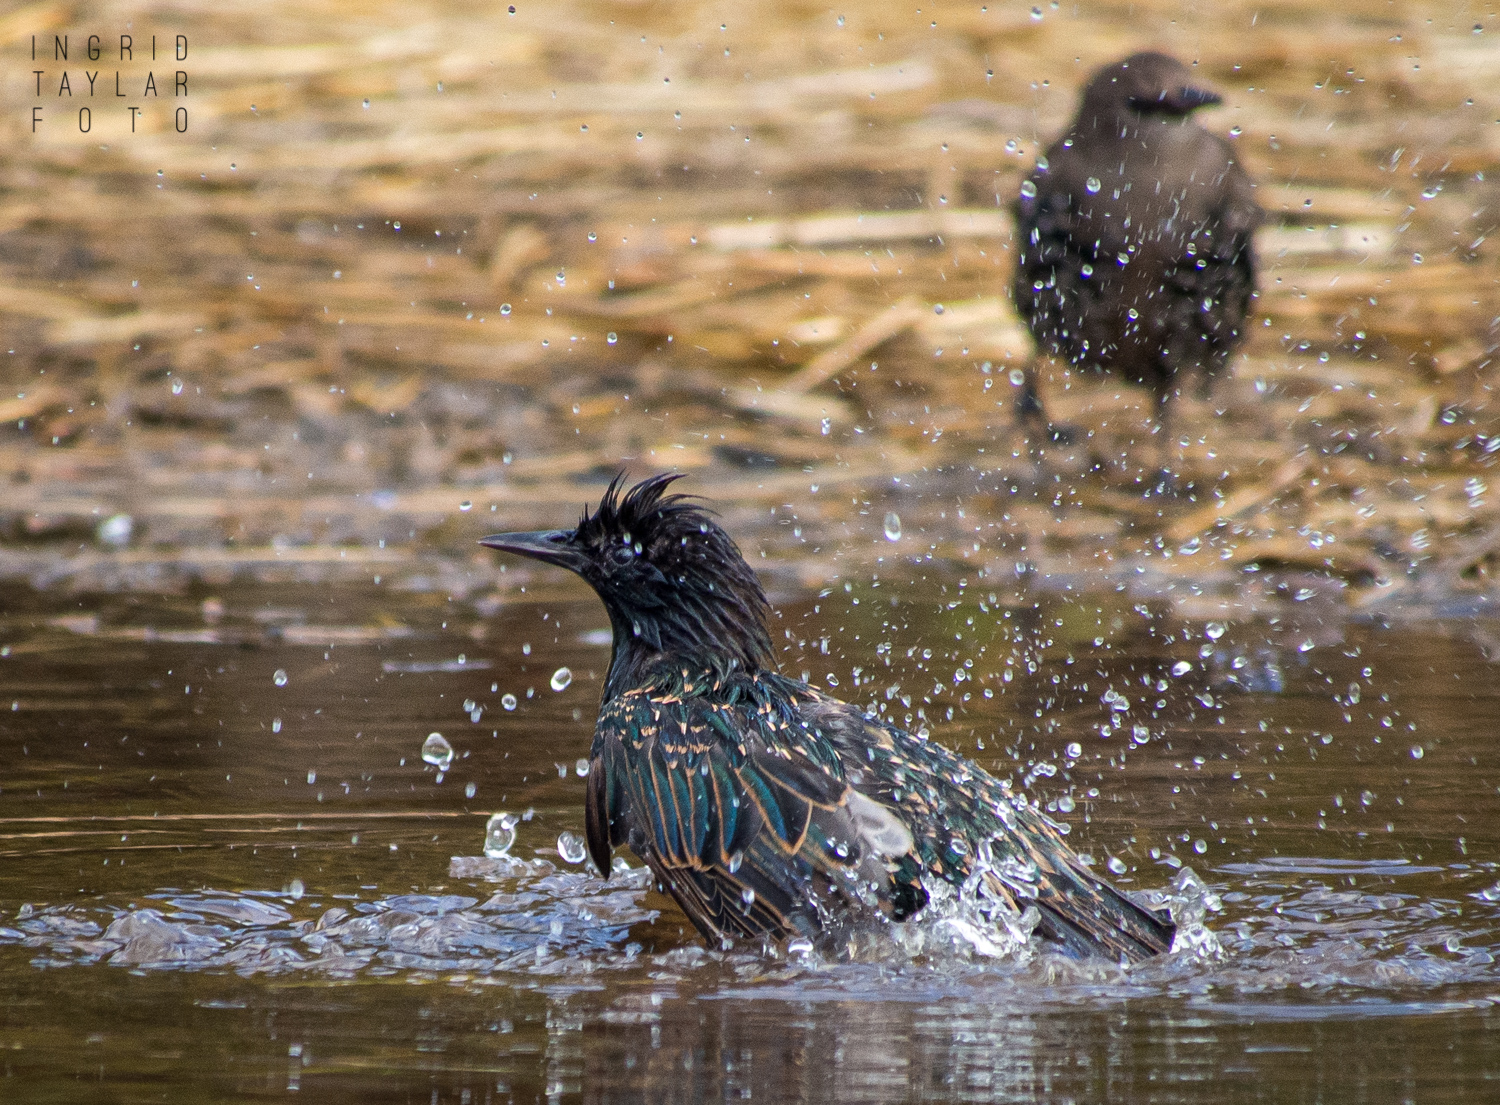 European Starling Bathing in Puddle